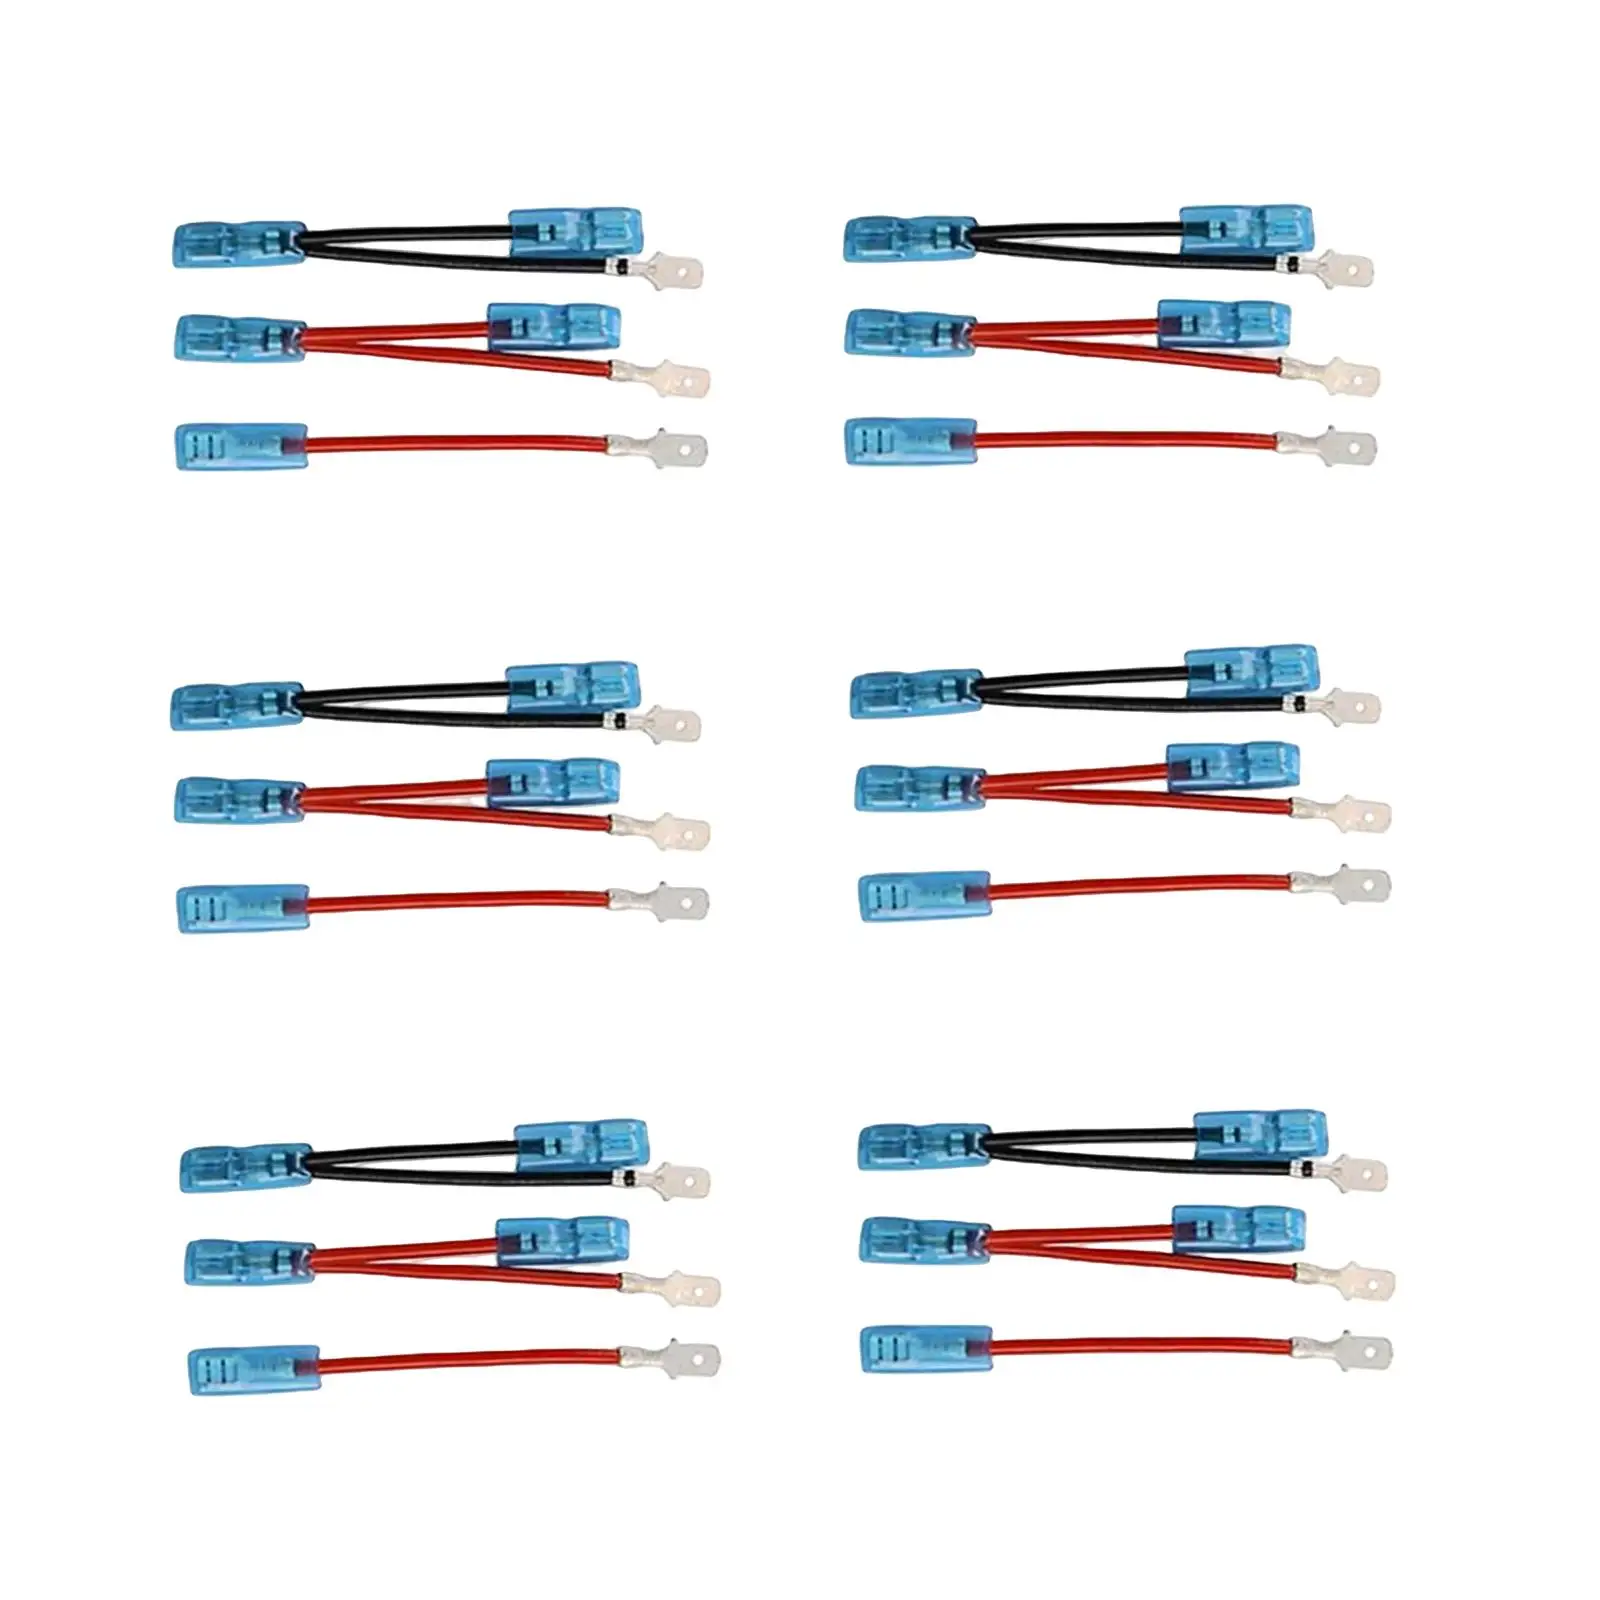 6Pcs 5 Pin Rocker Switch Jumper Wires Set Easy to Install with Male Female Terminal Portable Parts for UTV Trucks Yachts